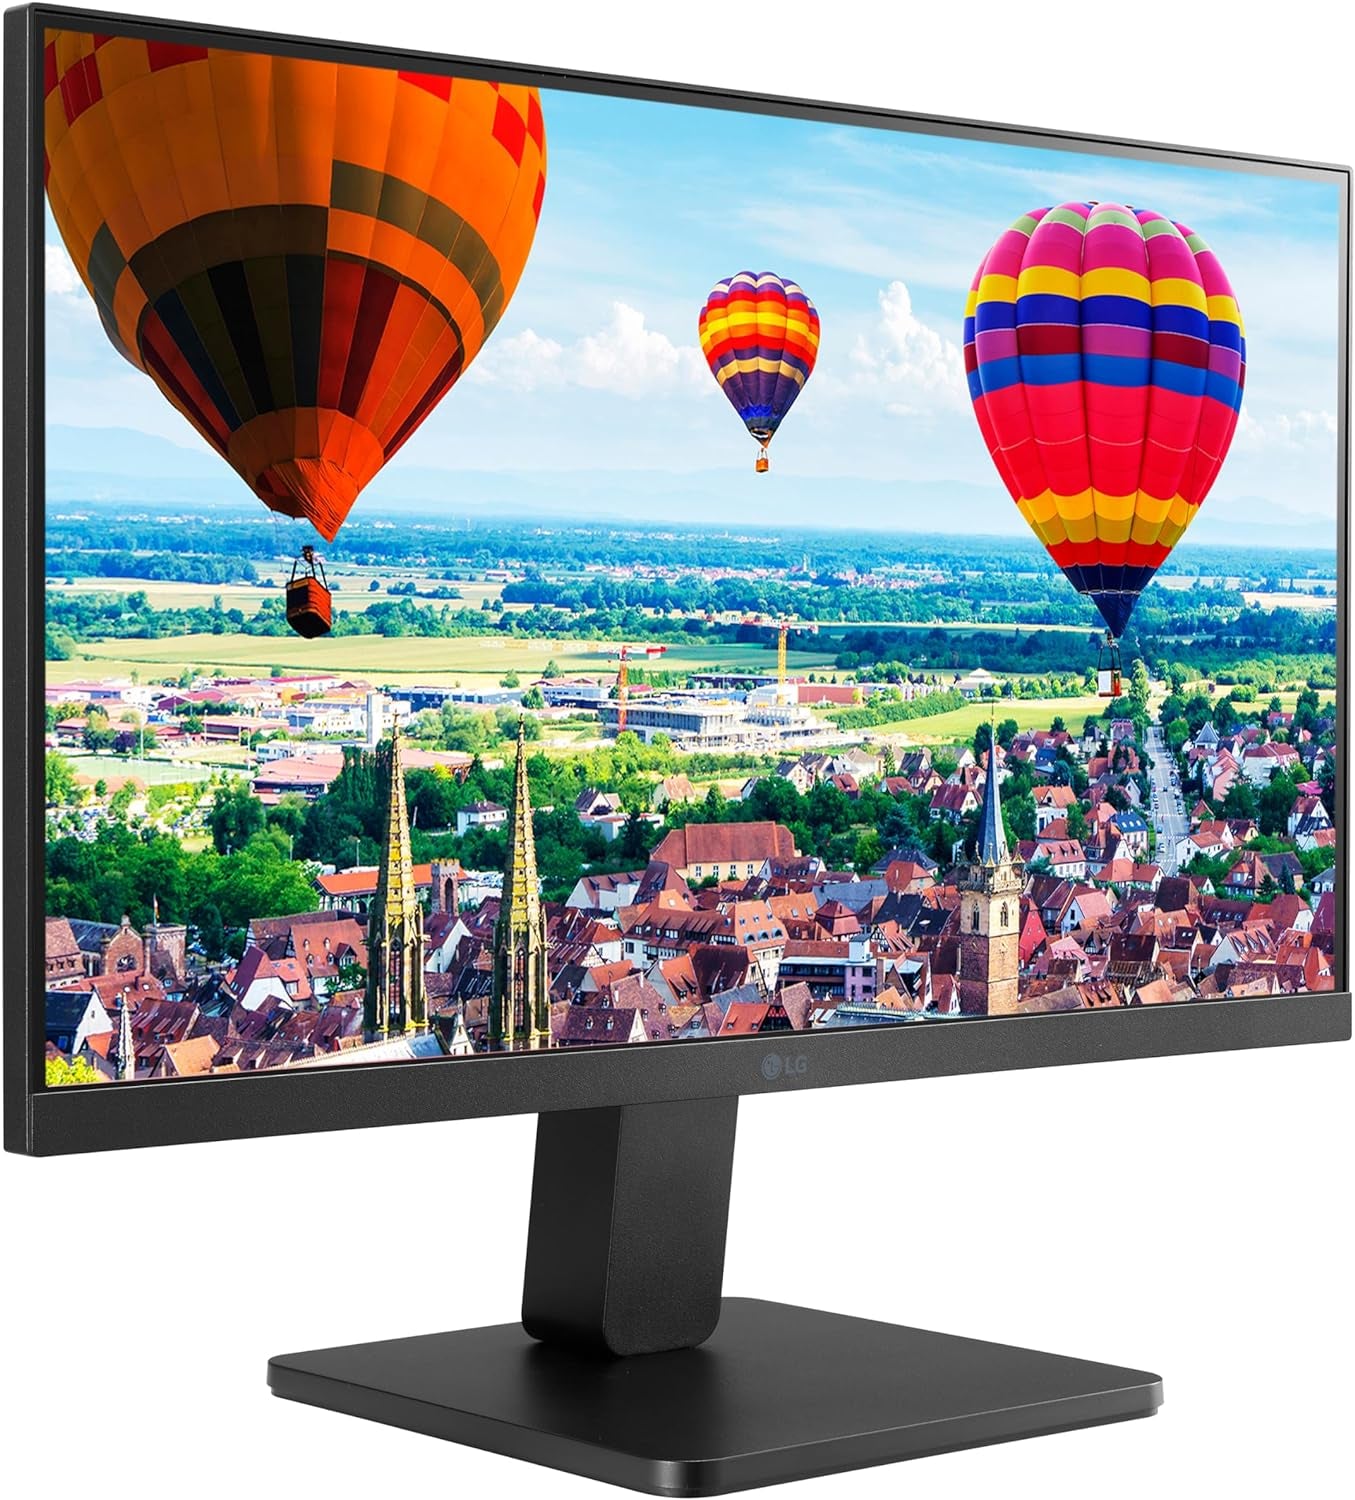 22MR41A 22” Full HD VA Monitor with AMD Freesync and 100Hz Refresh Rate